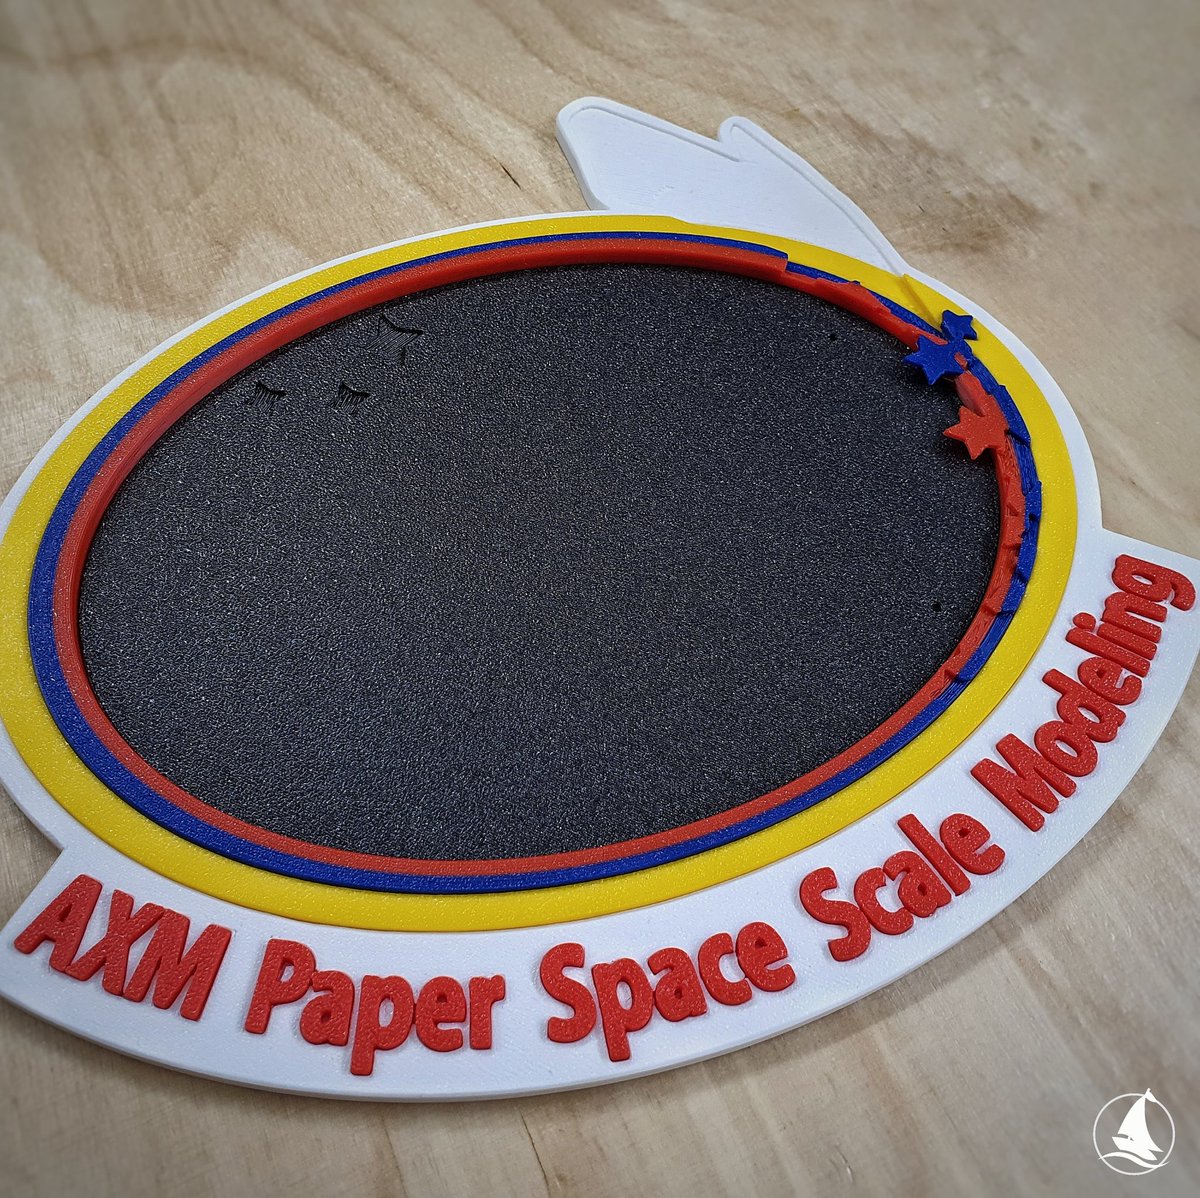 I love it to see when all the parts come together🥰. Creating the AXM 3d patch for @Axm61 .☺️👍
...
How it's made:
instagram.com/explore/tags/a…
...
#teamspace #spacenerd #space #axm #3d_mission_patch